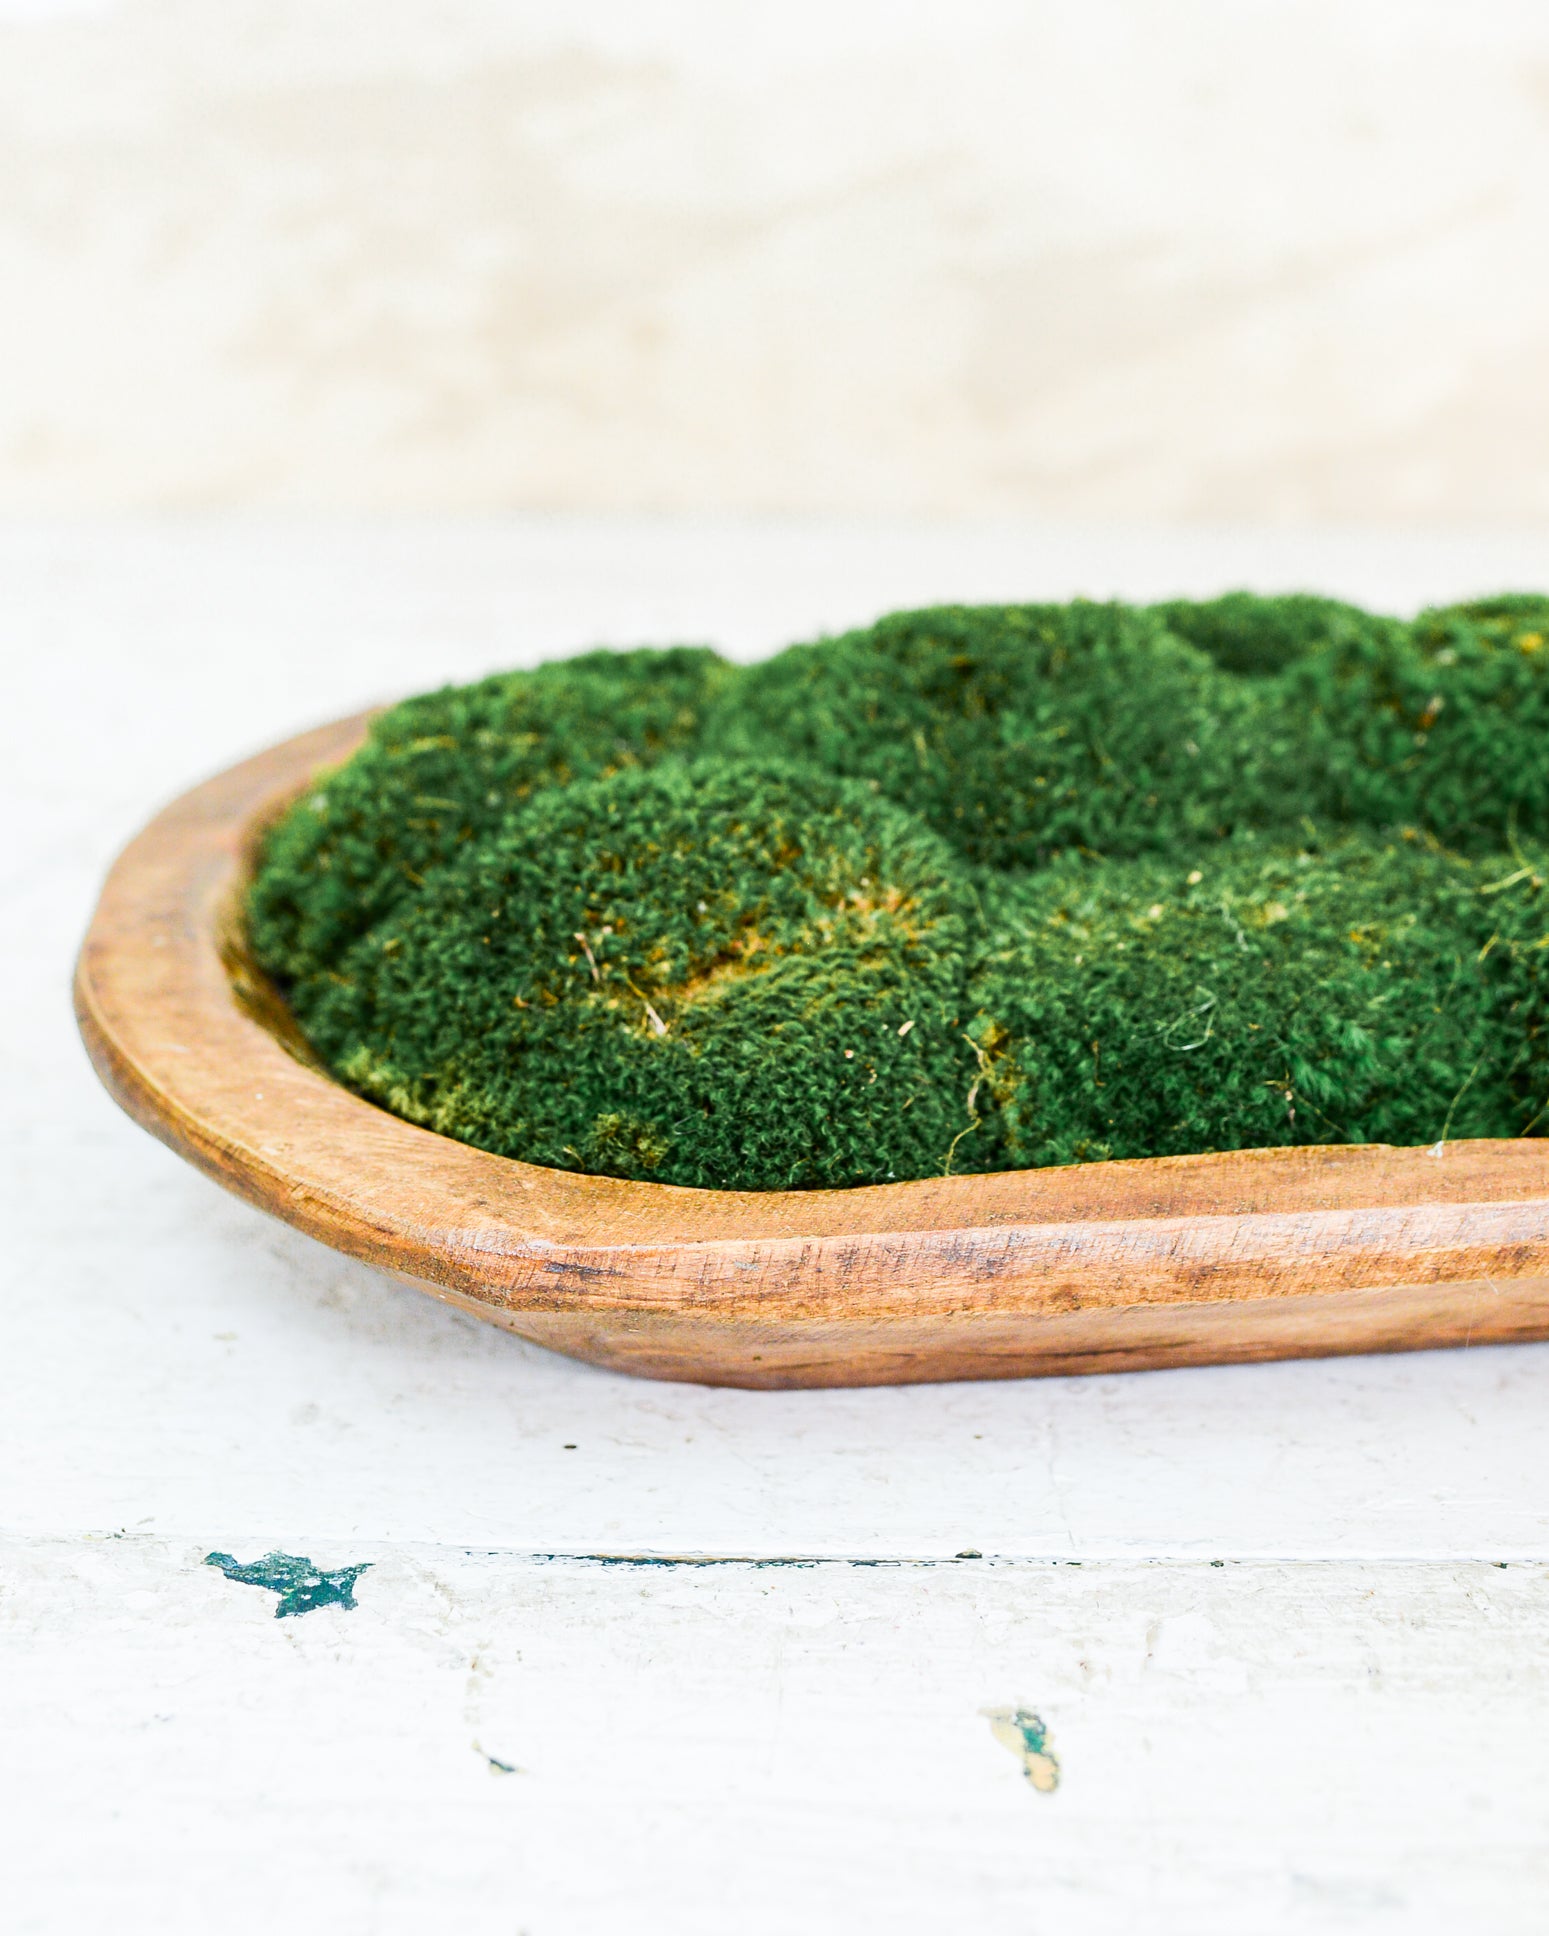 Carved Bowl with Green Mood Moss